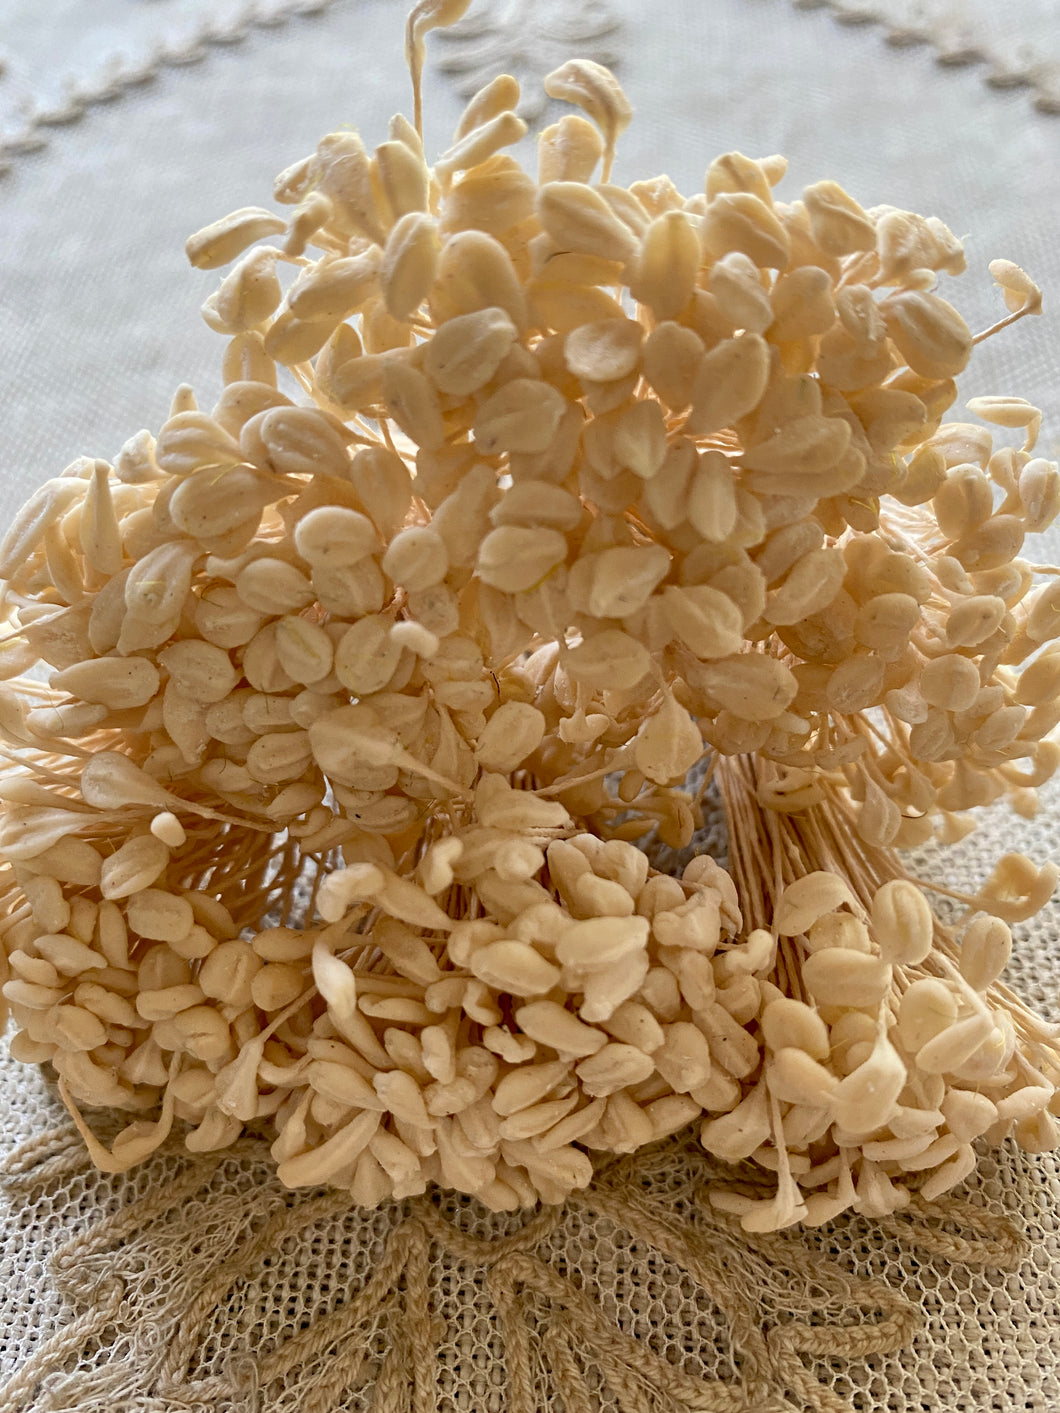 Original Large Bunches of Vintage Stamens